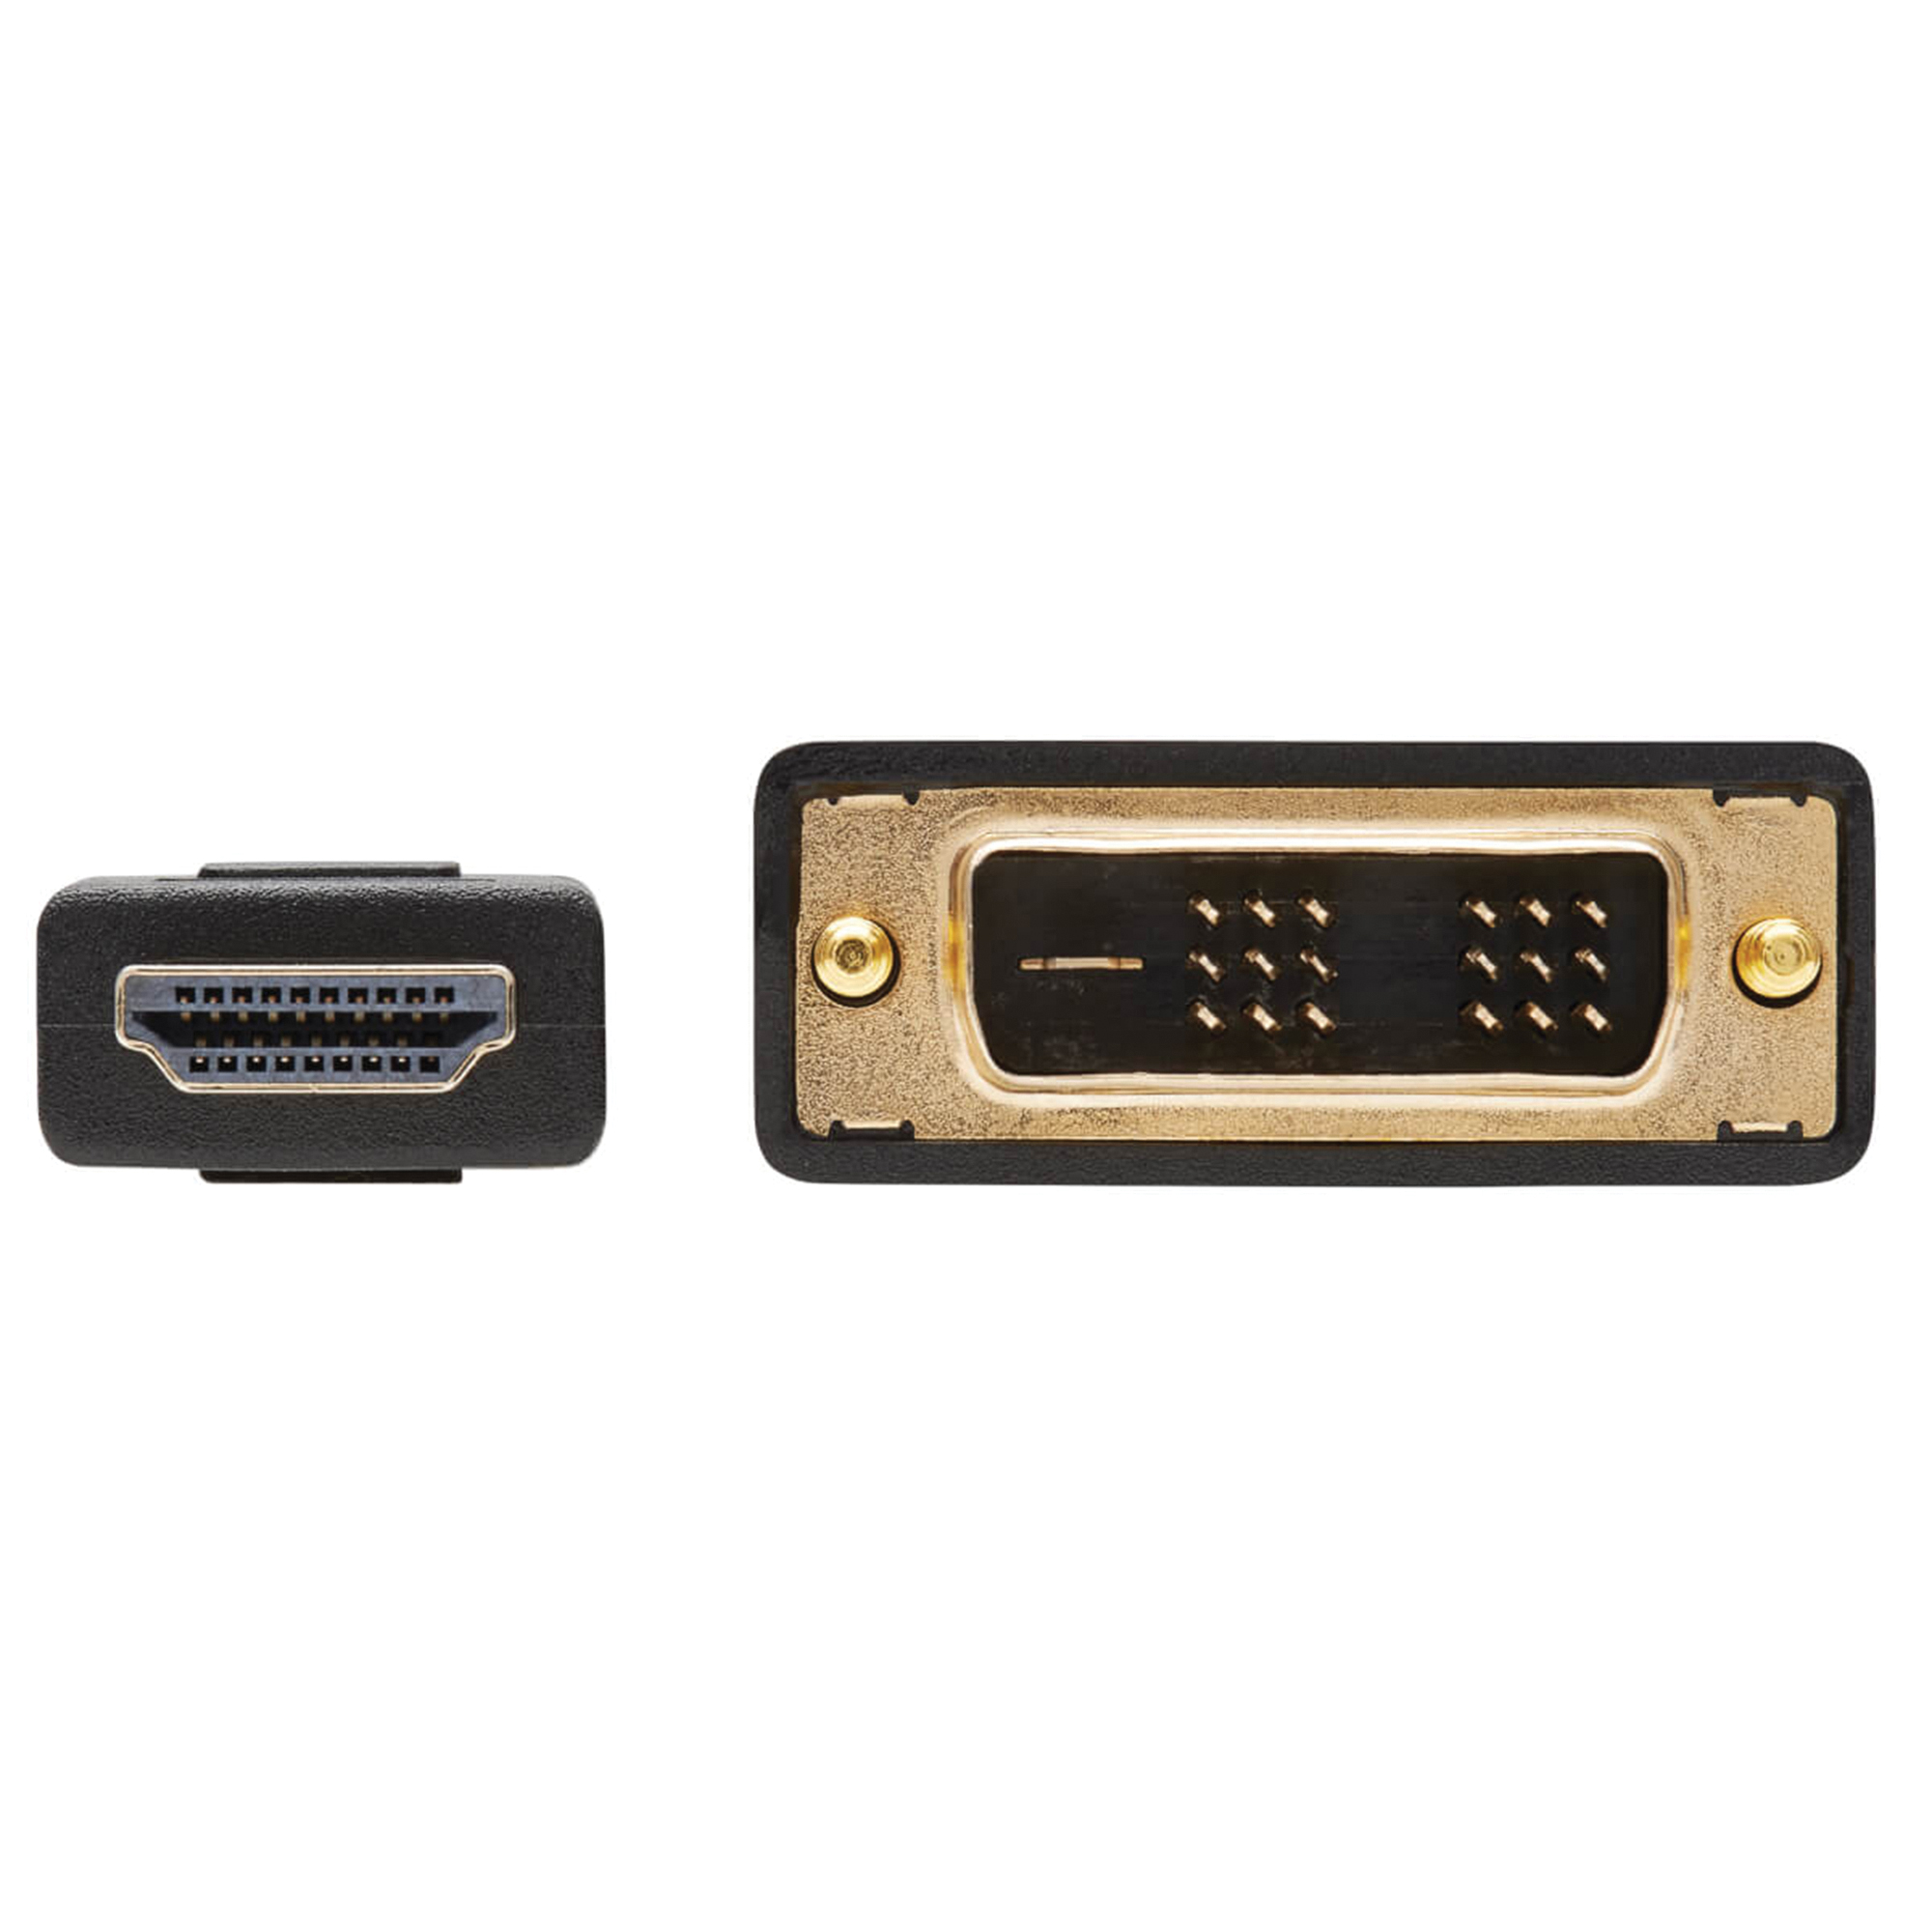 Tripp Lite HDMI to DVI Cable, Digital Monitor Adapter Cable (HDMI to DVI-D M/M), 1080P, 6-ft. (P566-006) - image 3 of 5